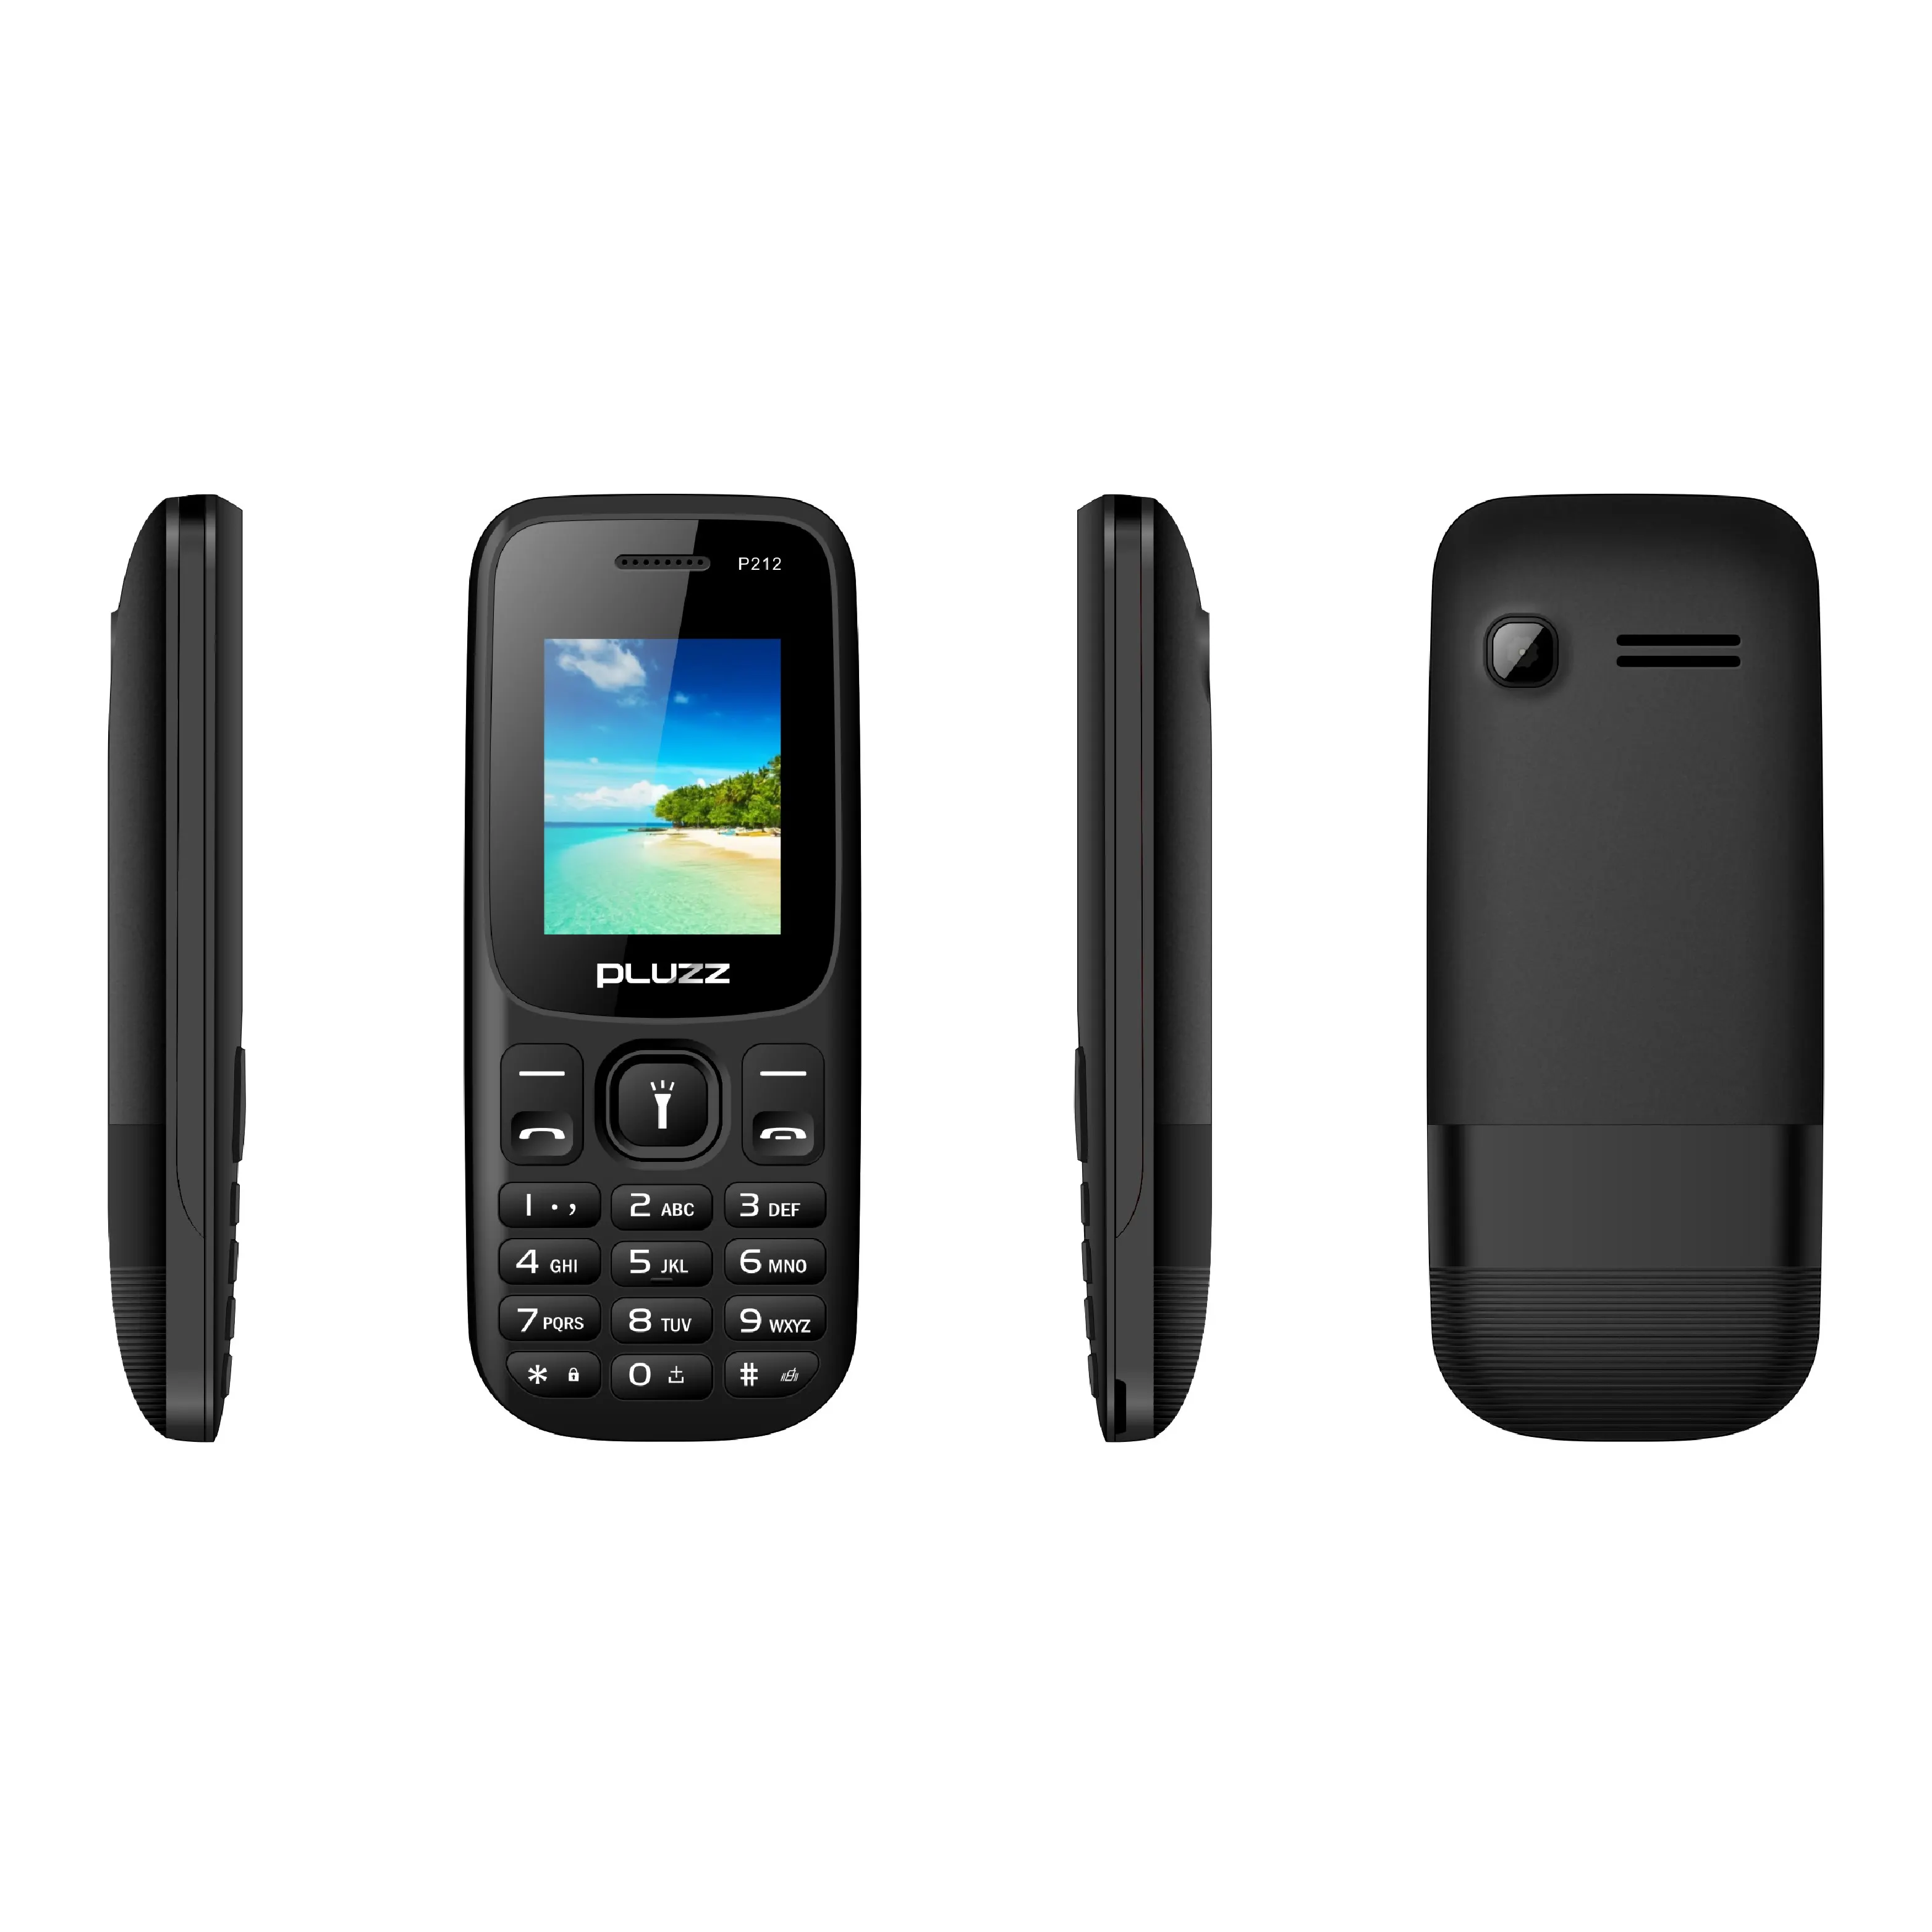 Promotion Price P212 F20 (3 In 1)SPK LED Torch 0.08 Mp Camera Mobile Feature Phone